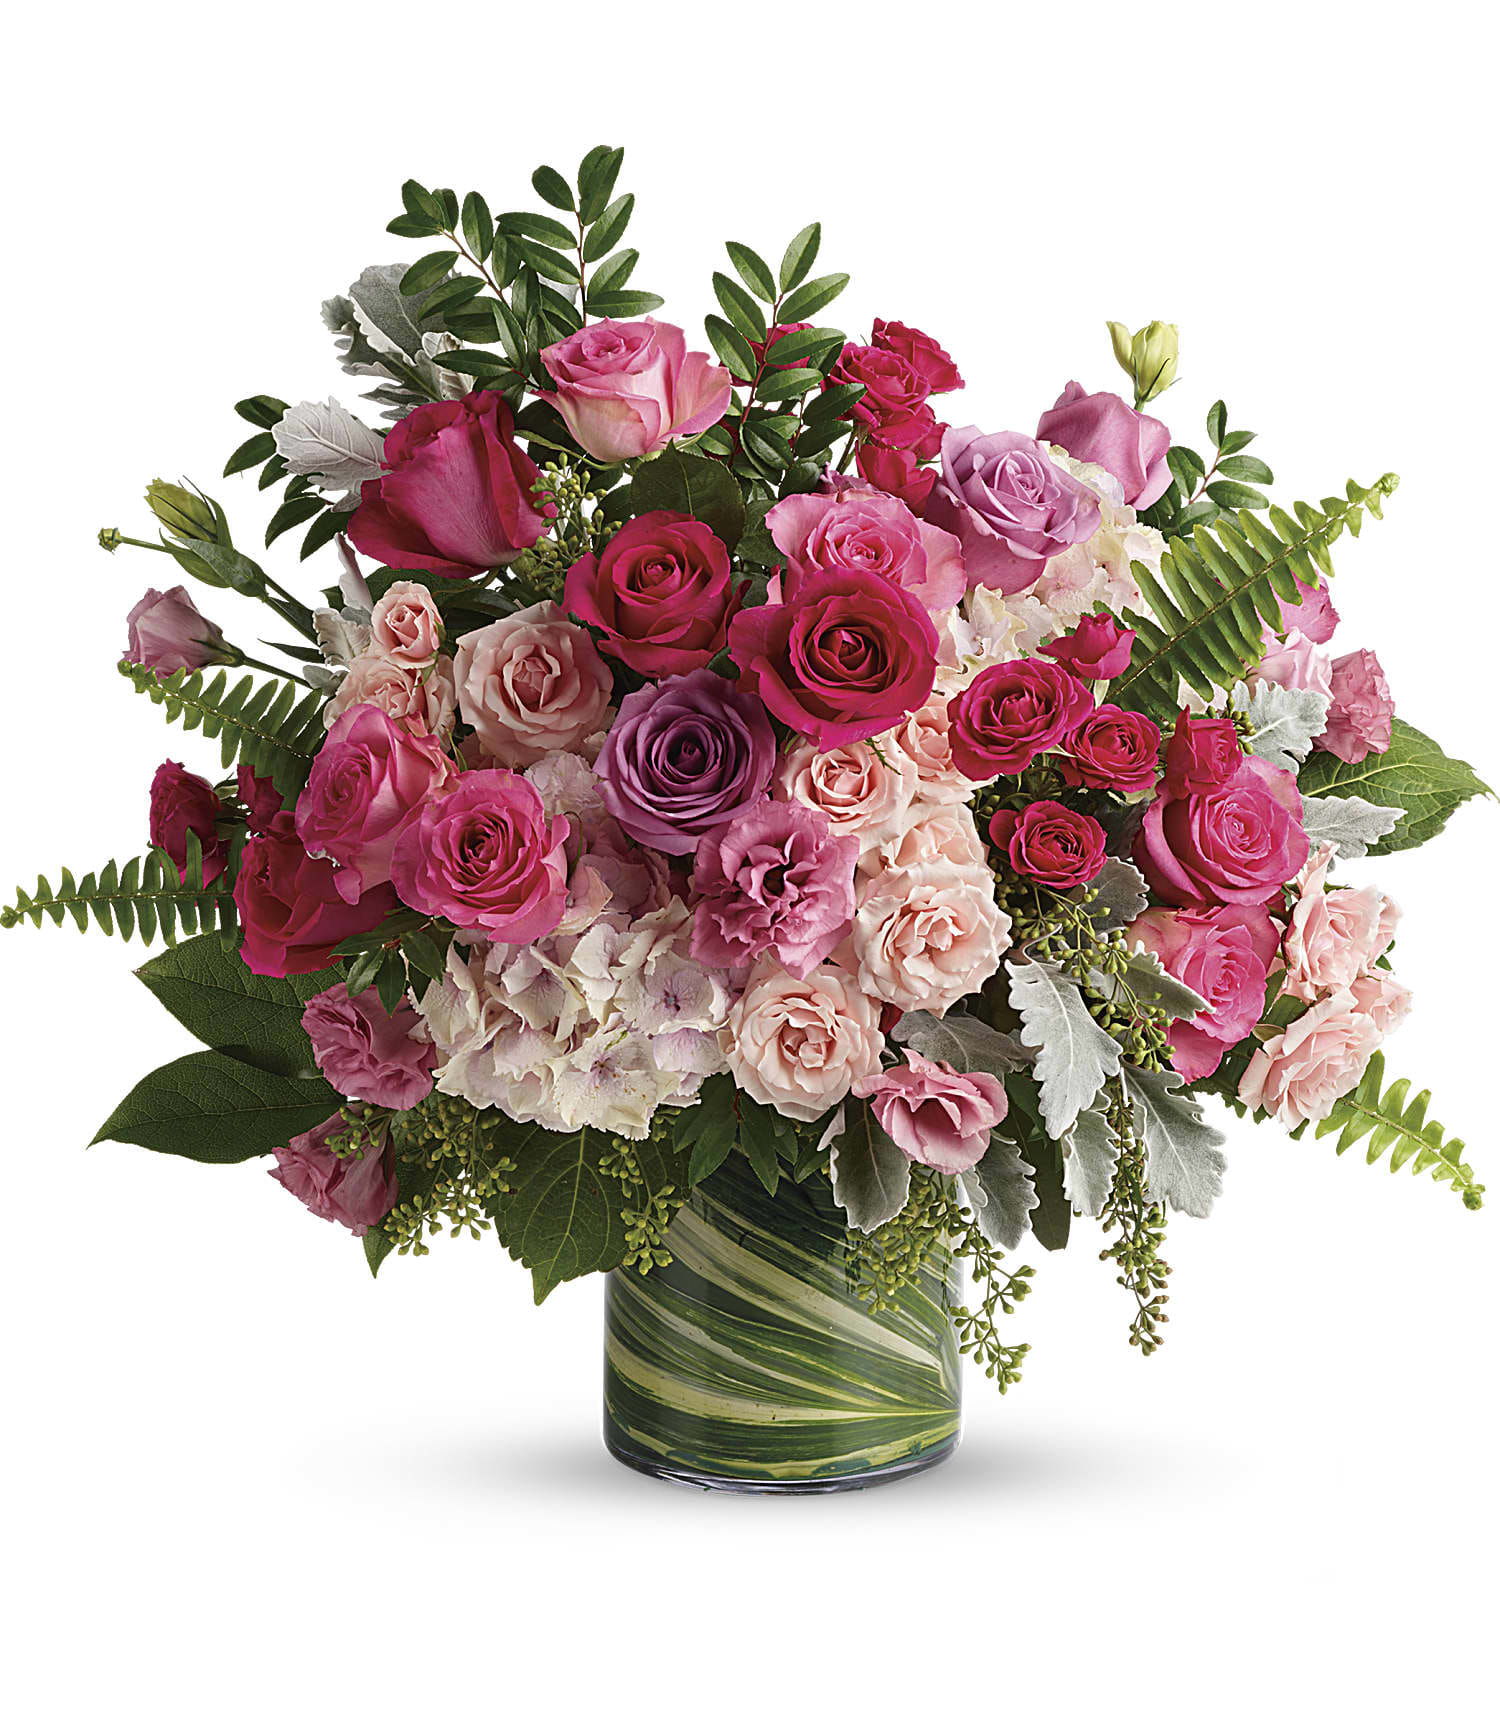 Haute Pink Bouquet - A high-fashion fantasy of roses! When you want to make a grand statement, send this dreamy bouquet of posh pink roses and modern greens. 